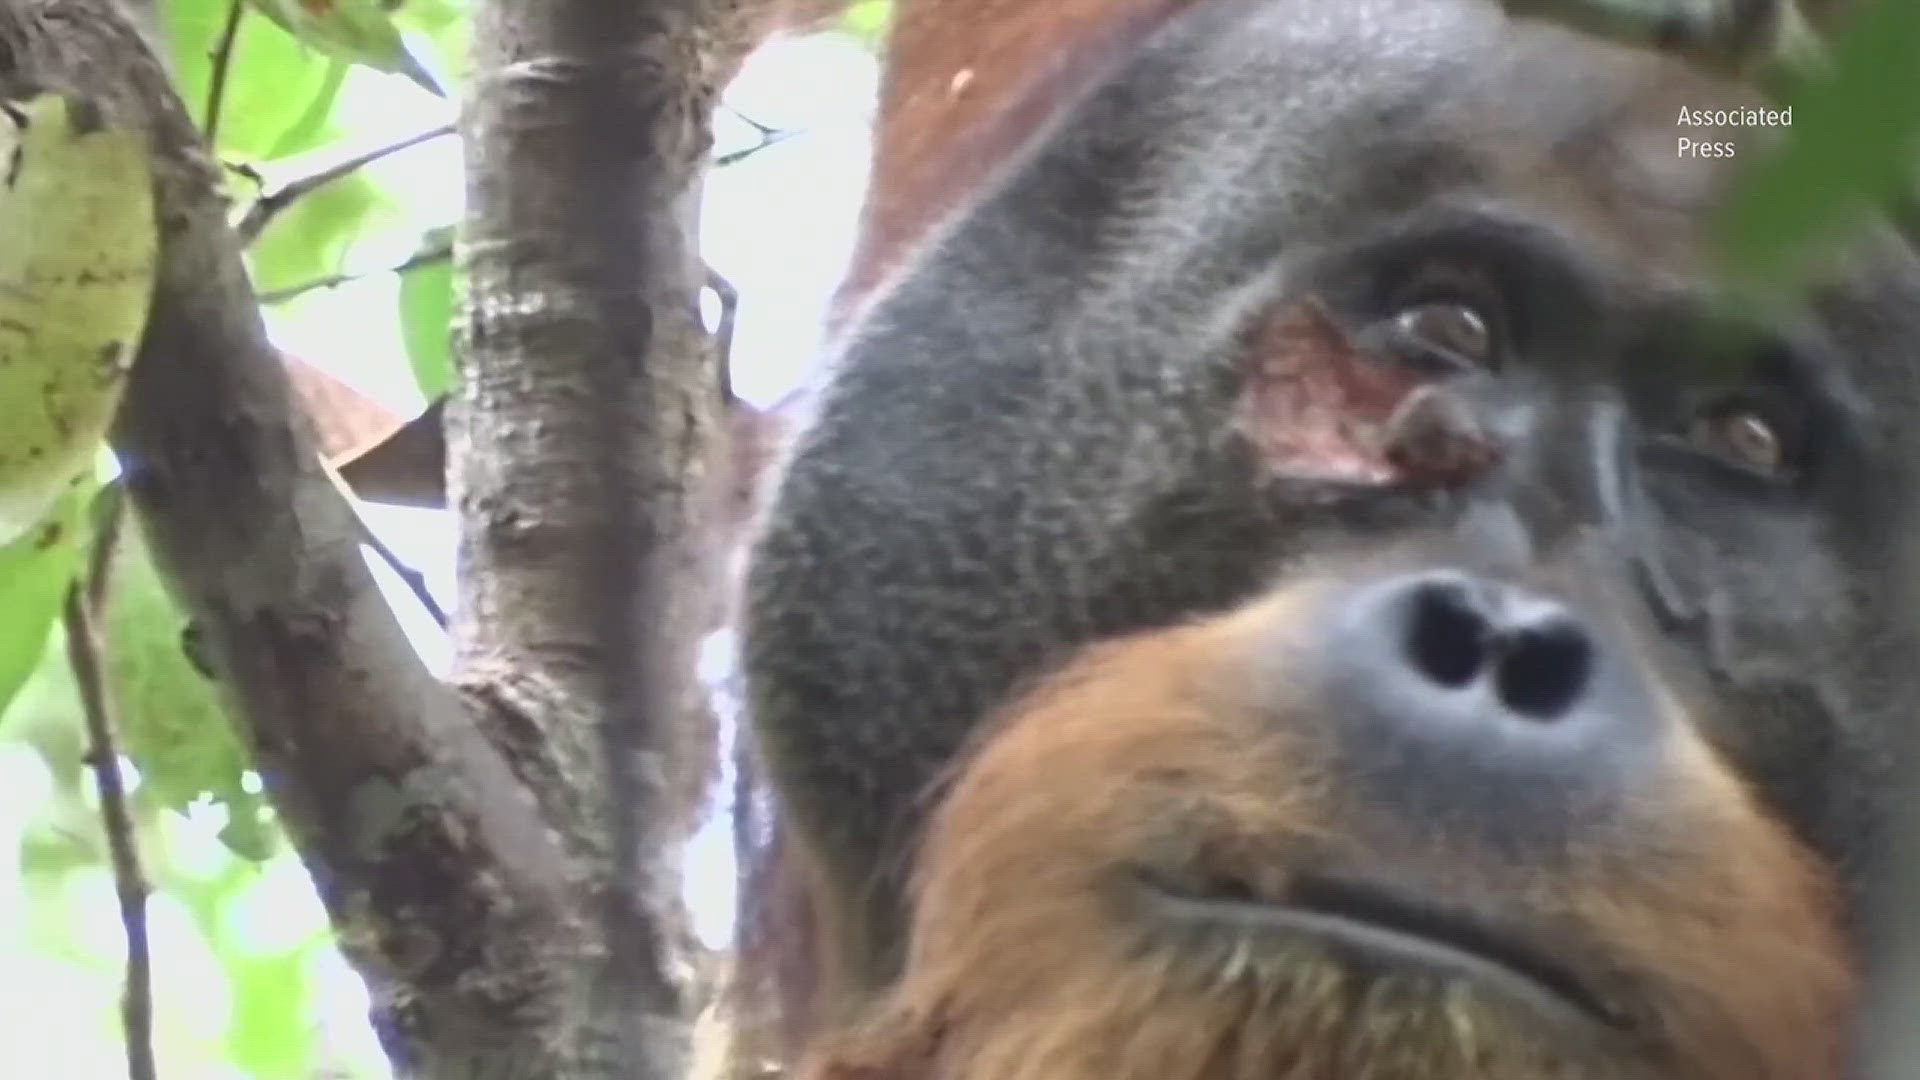 This is the first time scientists have seen this type of behavior from an Orangutan. The wound healed in around a month according to reports.